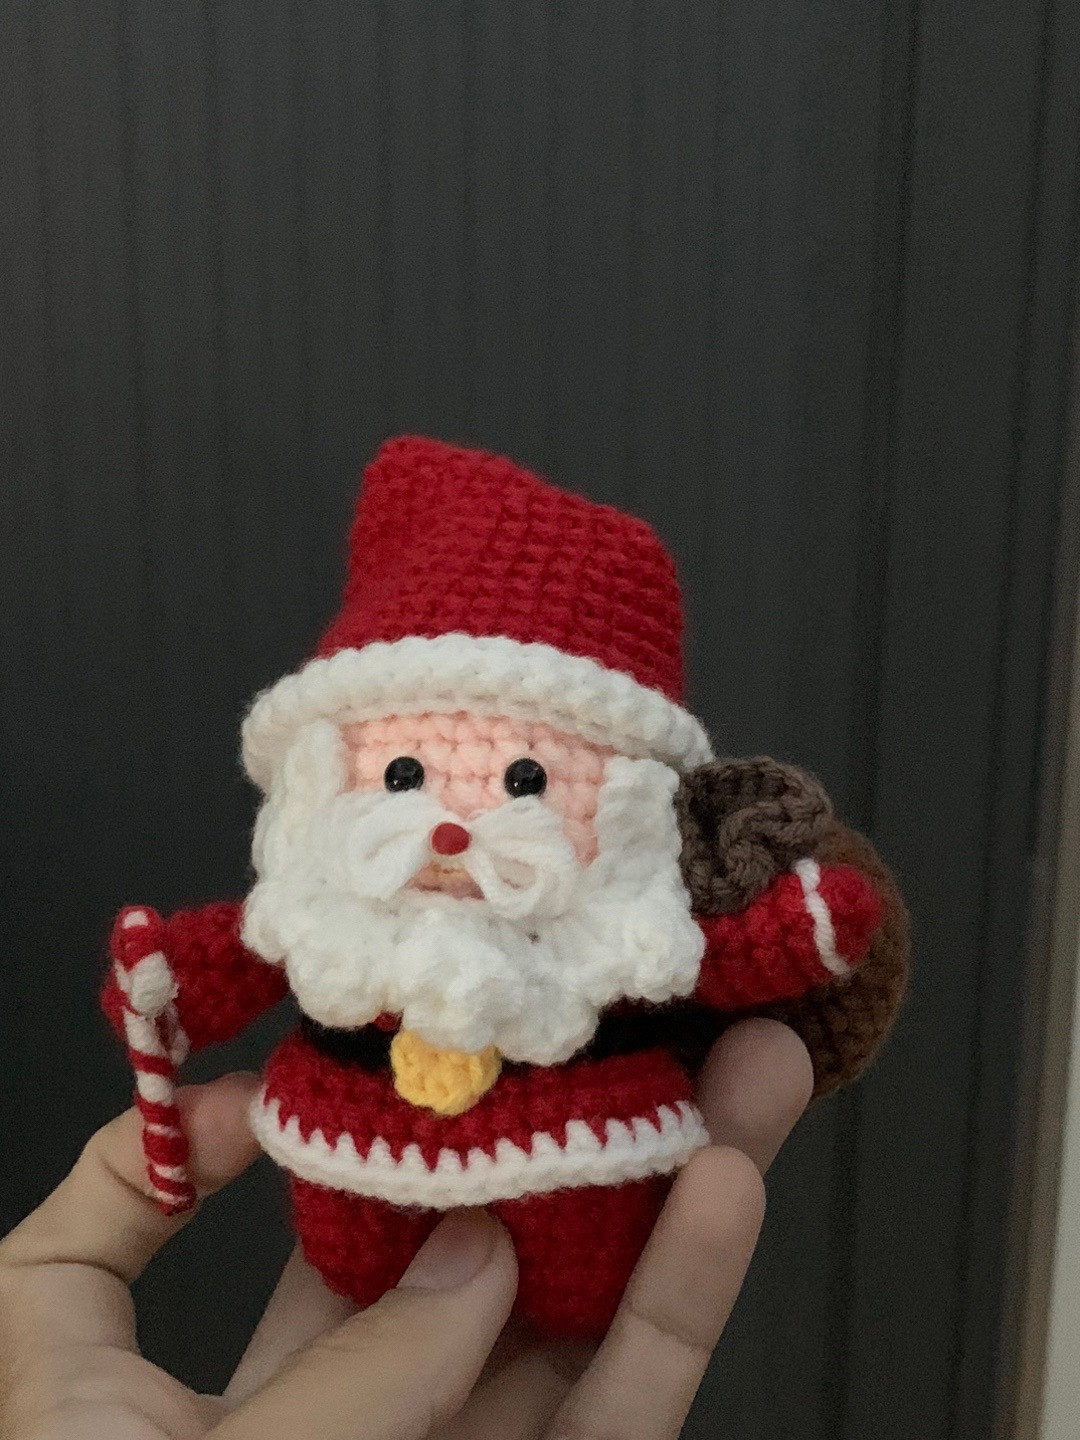 Crochet pattern for Santa Claus, wearing a red hat and white beard.